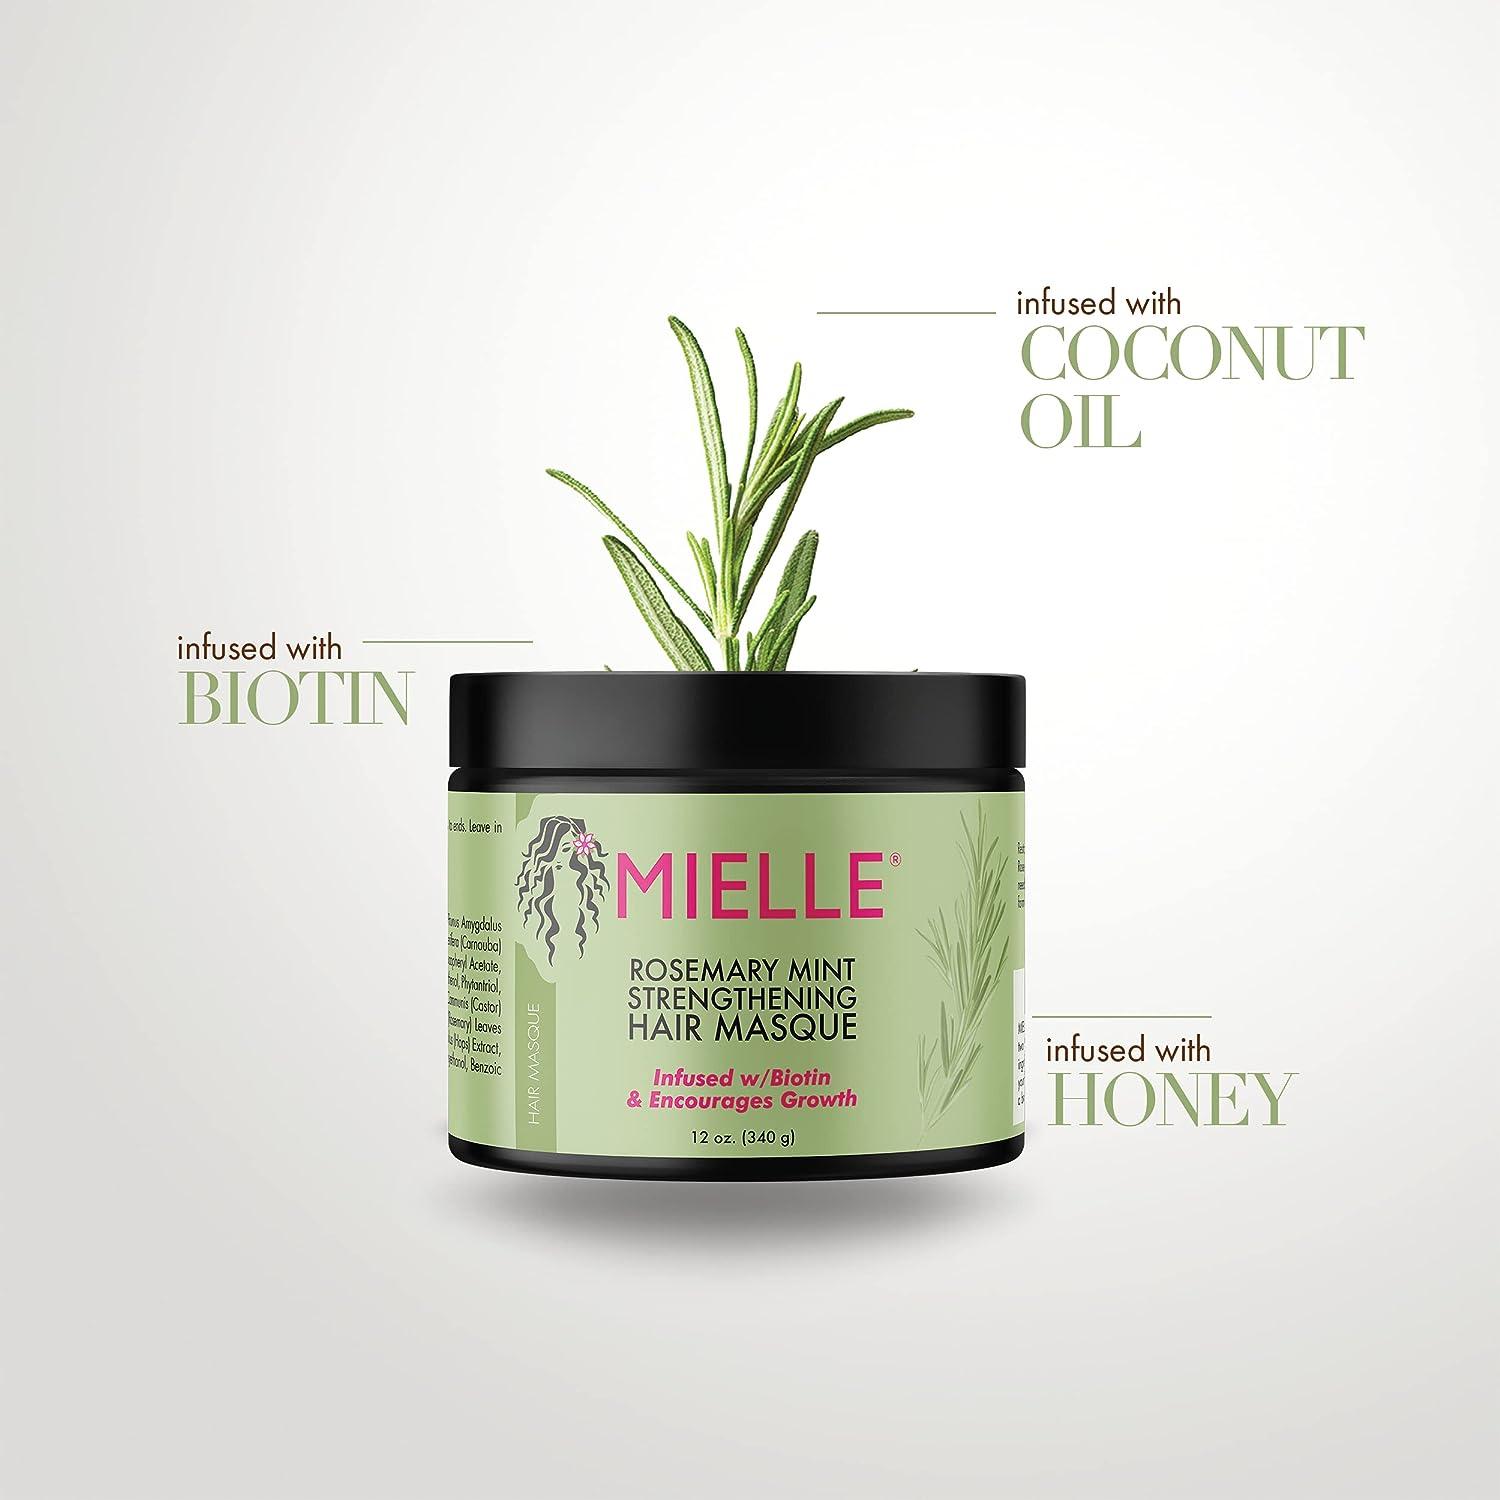 Mielle Rosemary Mint Scalp,Hair Strengthening Oil Infused with Biotin